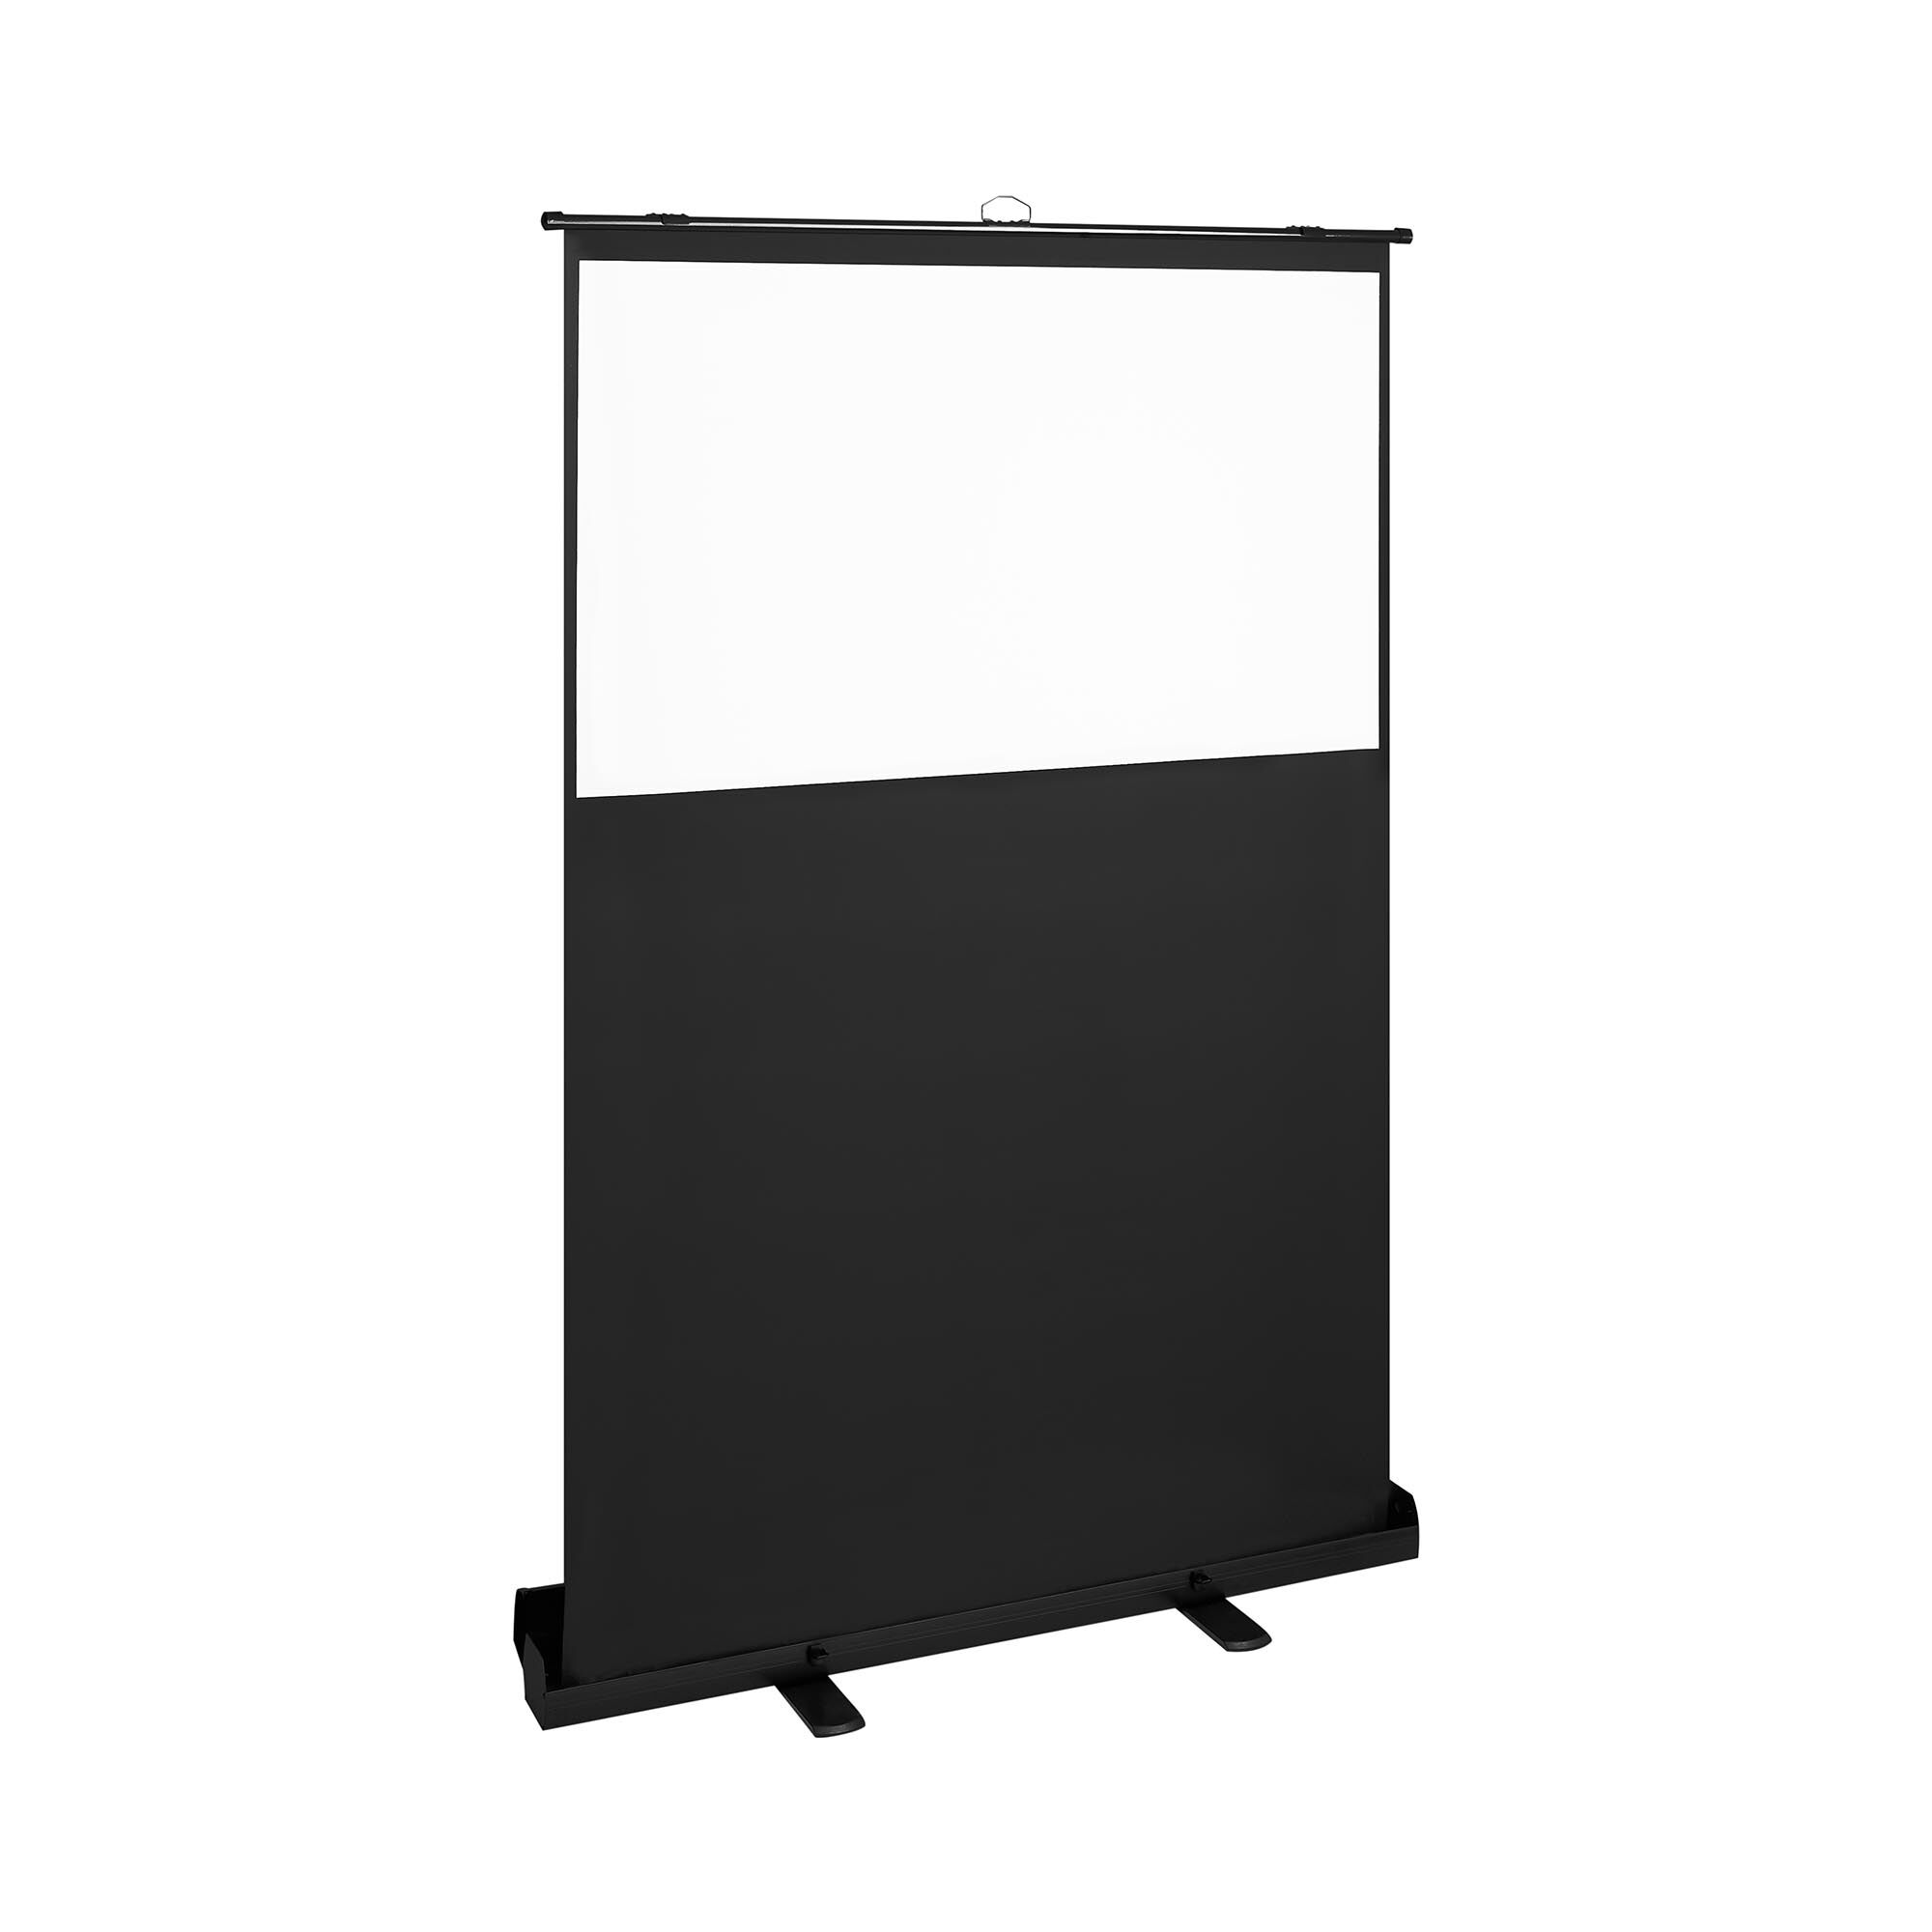 Fromm & Starck Roll-up Projector Screen - 144.5 x 203 cm - 16:9 - mobile